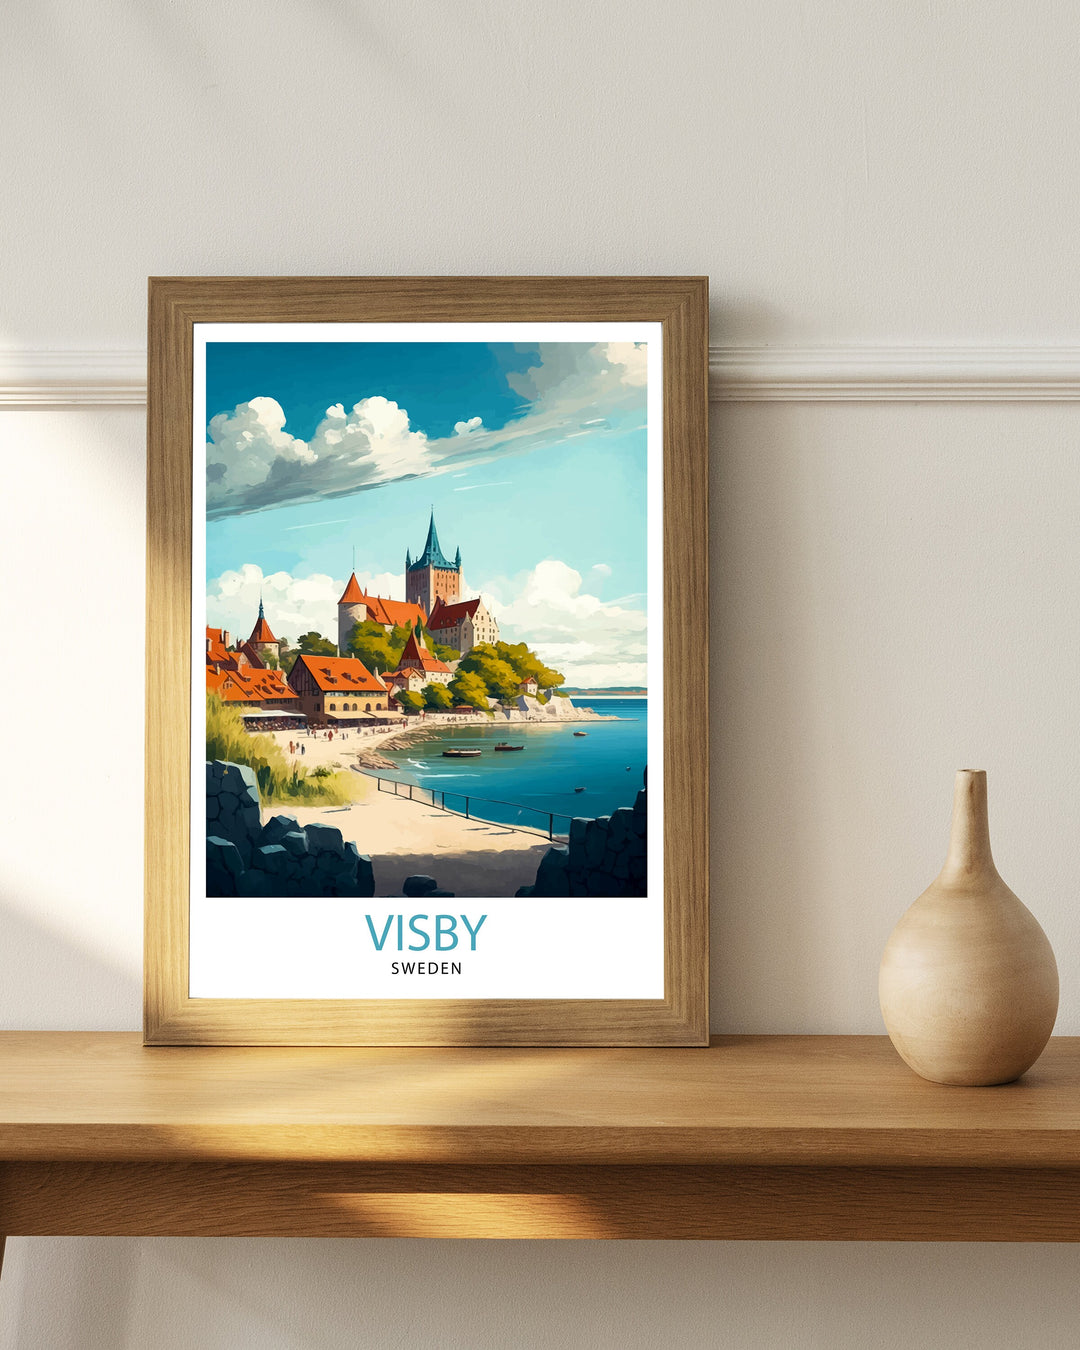 Visby Sweden Travel Poster Visby Wall Art Visby Home Decor Visby Cityscape Illustration Visby Poster Visby Travel Souvenir Sweden Travel